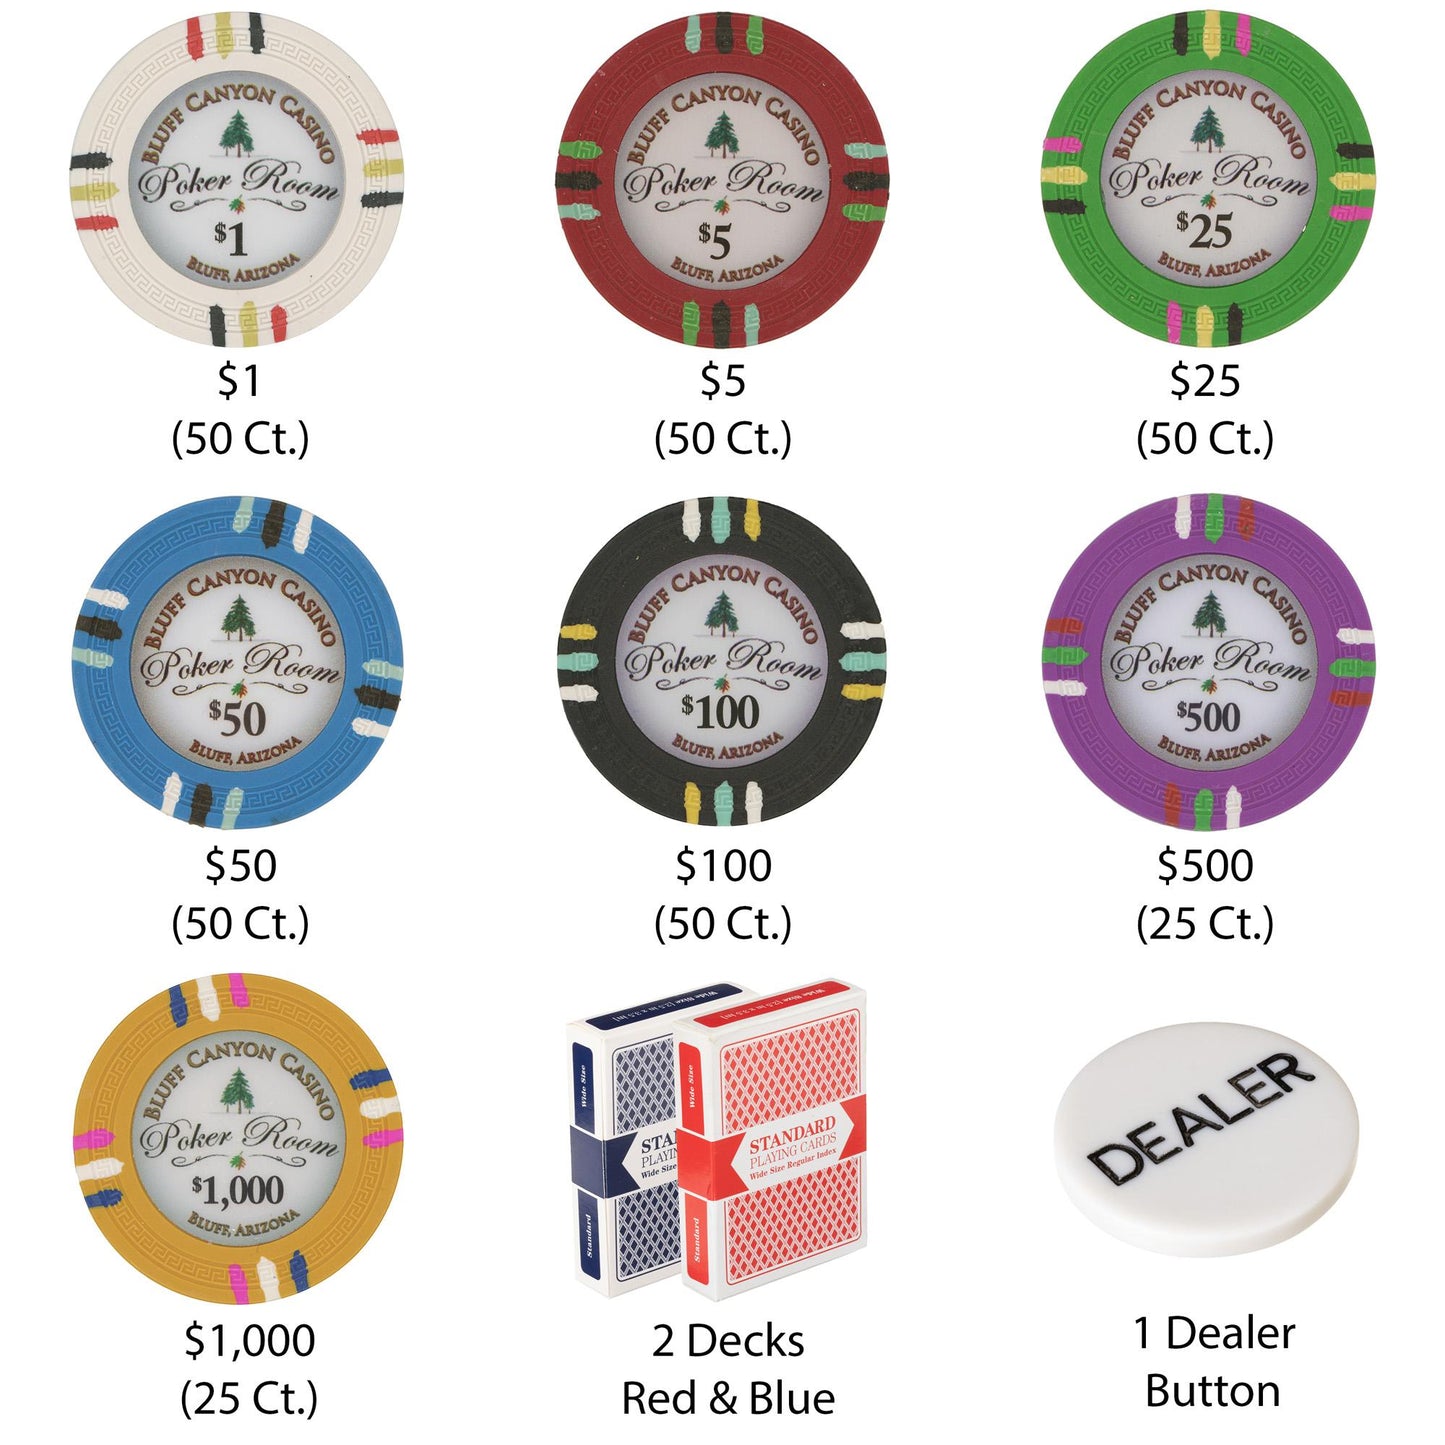 300 Bluff Canyon Poker Chips with Wooden Carousel